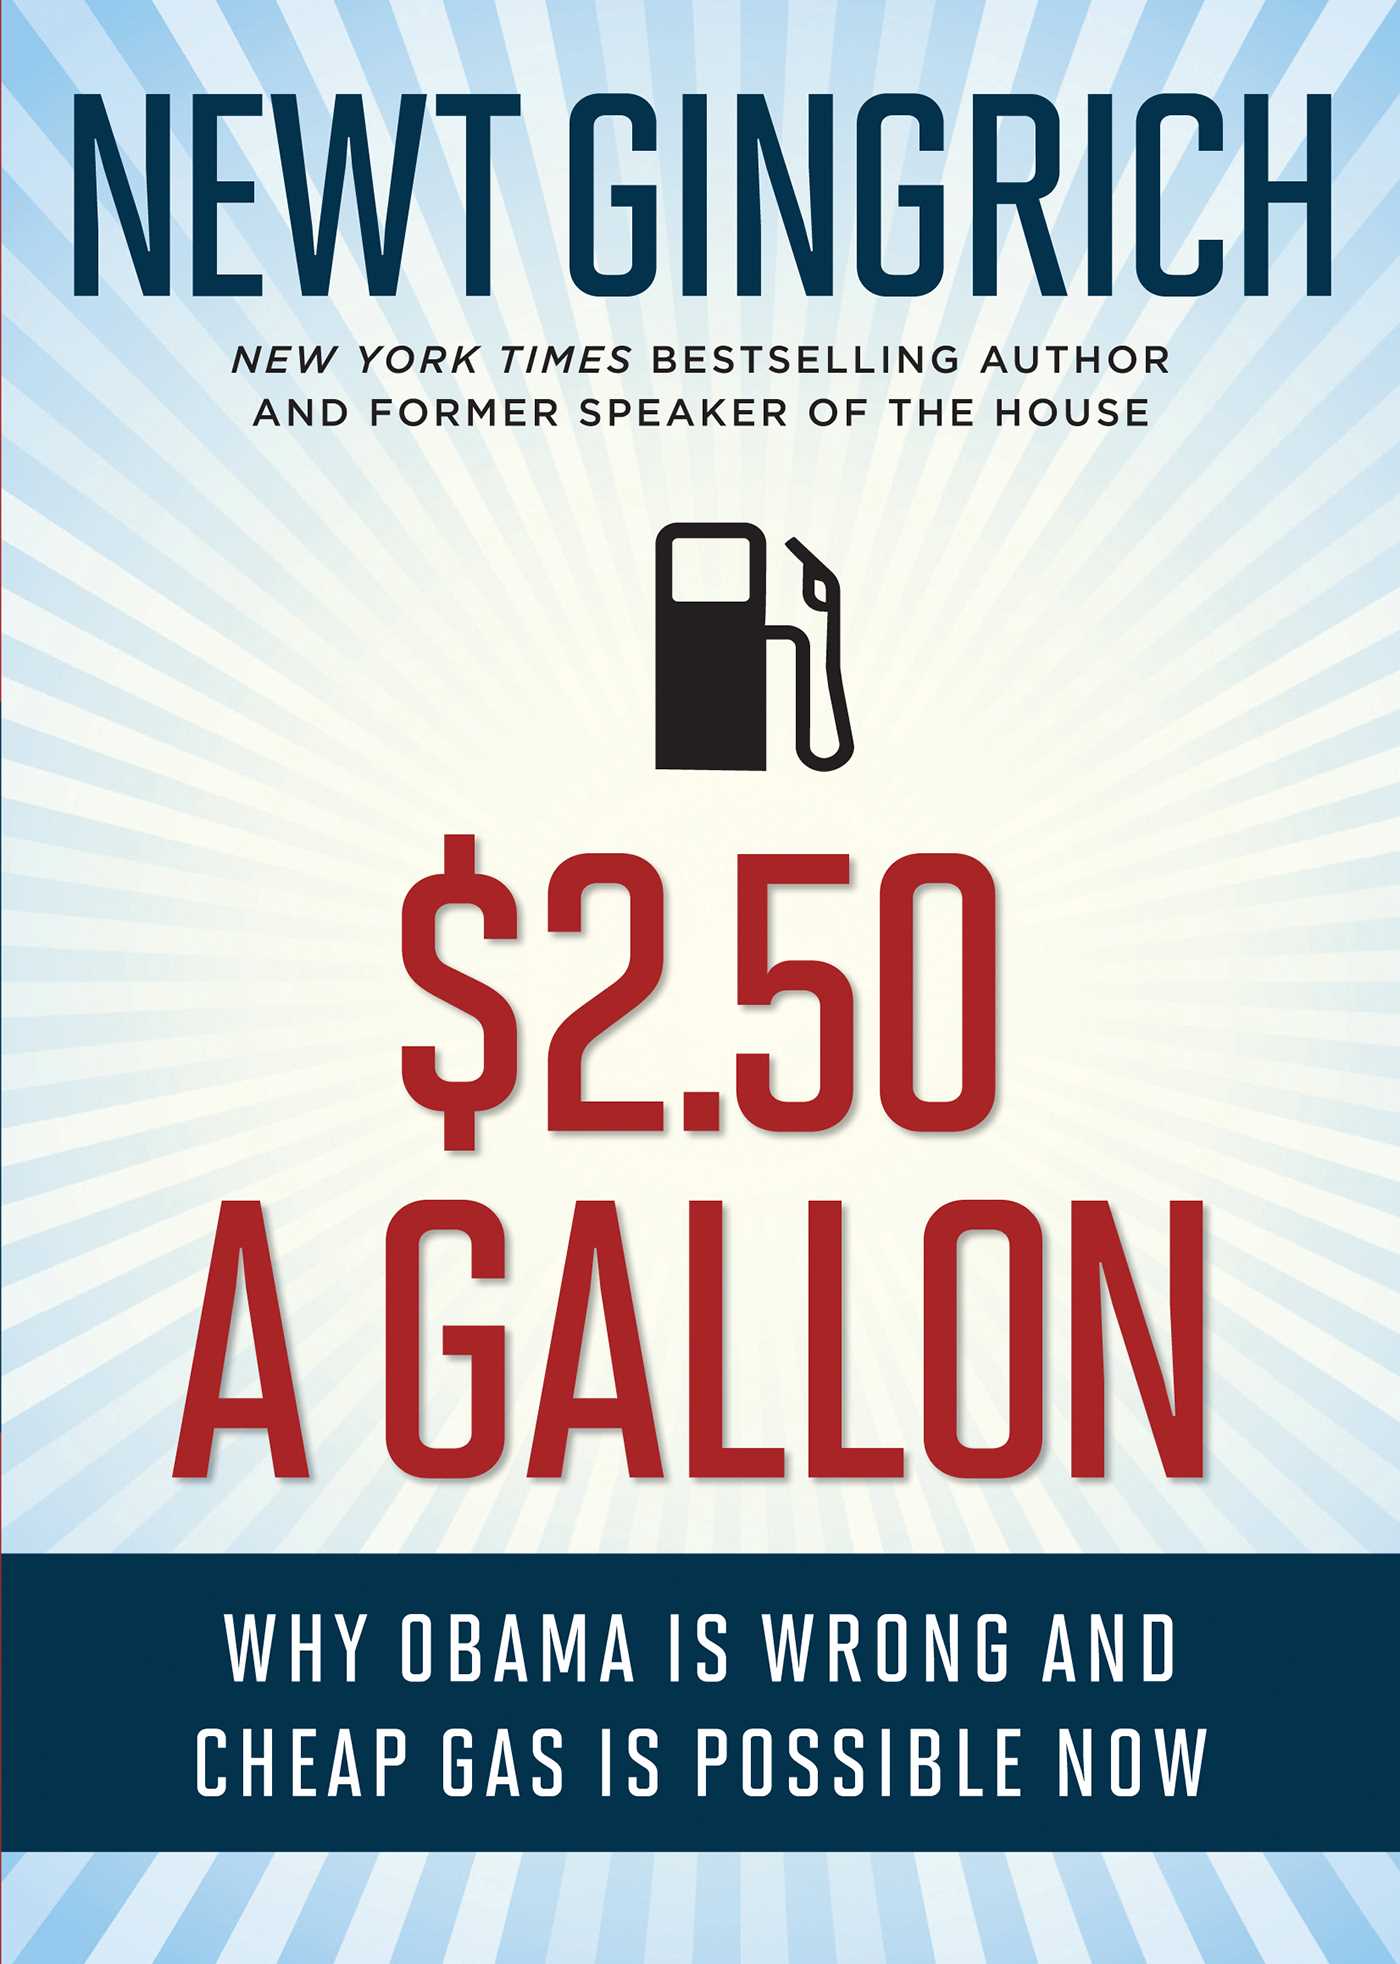 $2.50 A Gallon: Why Obama Is Wrong and Cheap Gas Is Possible